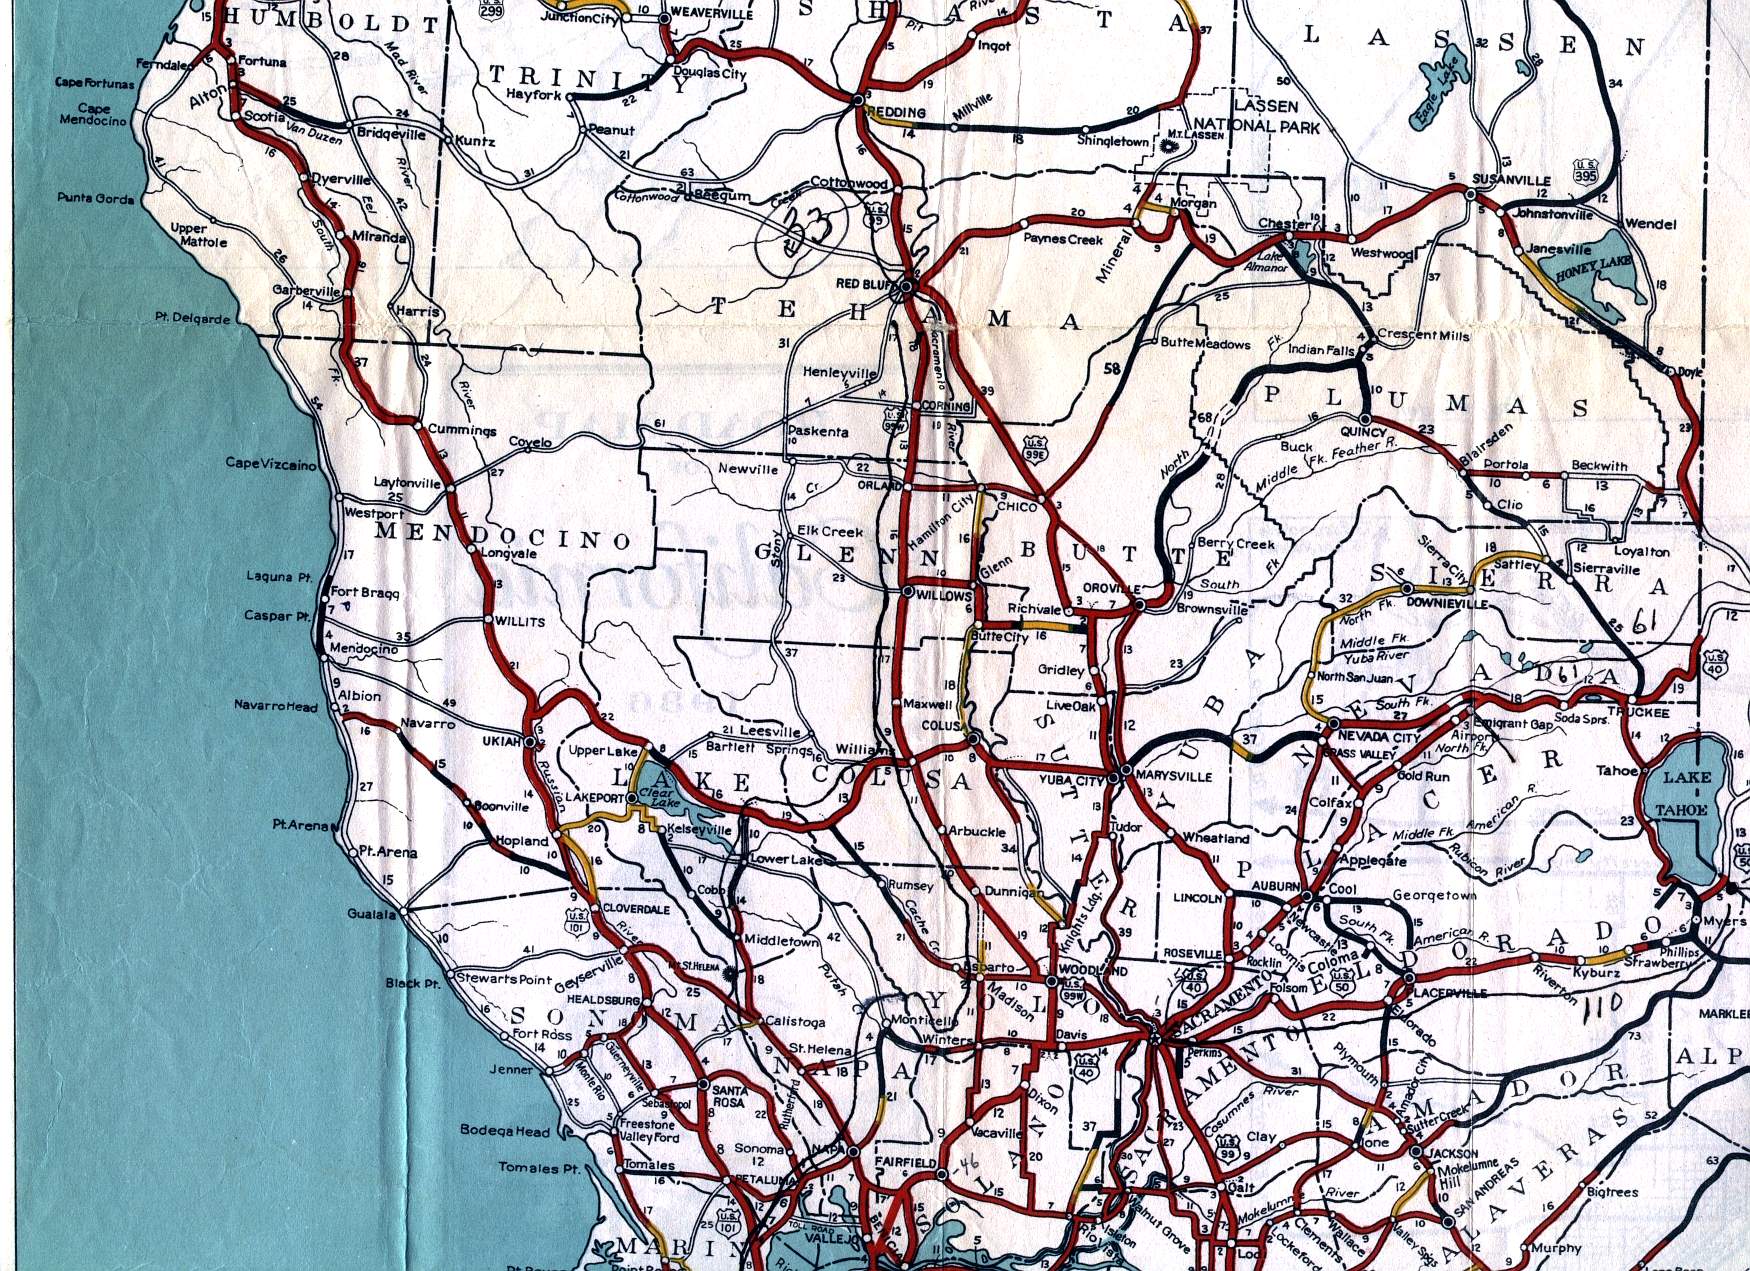 Mendocino and Lake counties plus the northern end of the Central Valley and Gold Country on the 1936 California official highway map